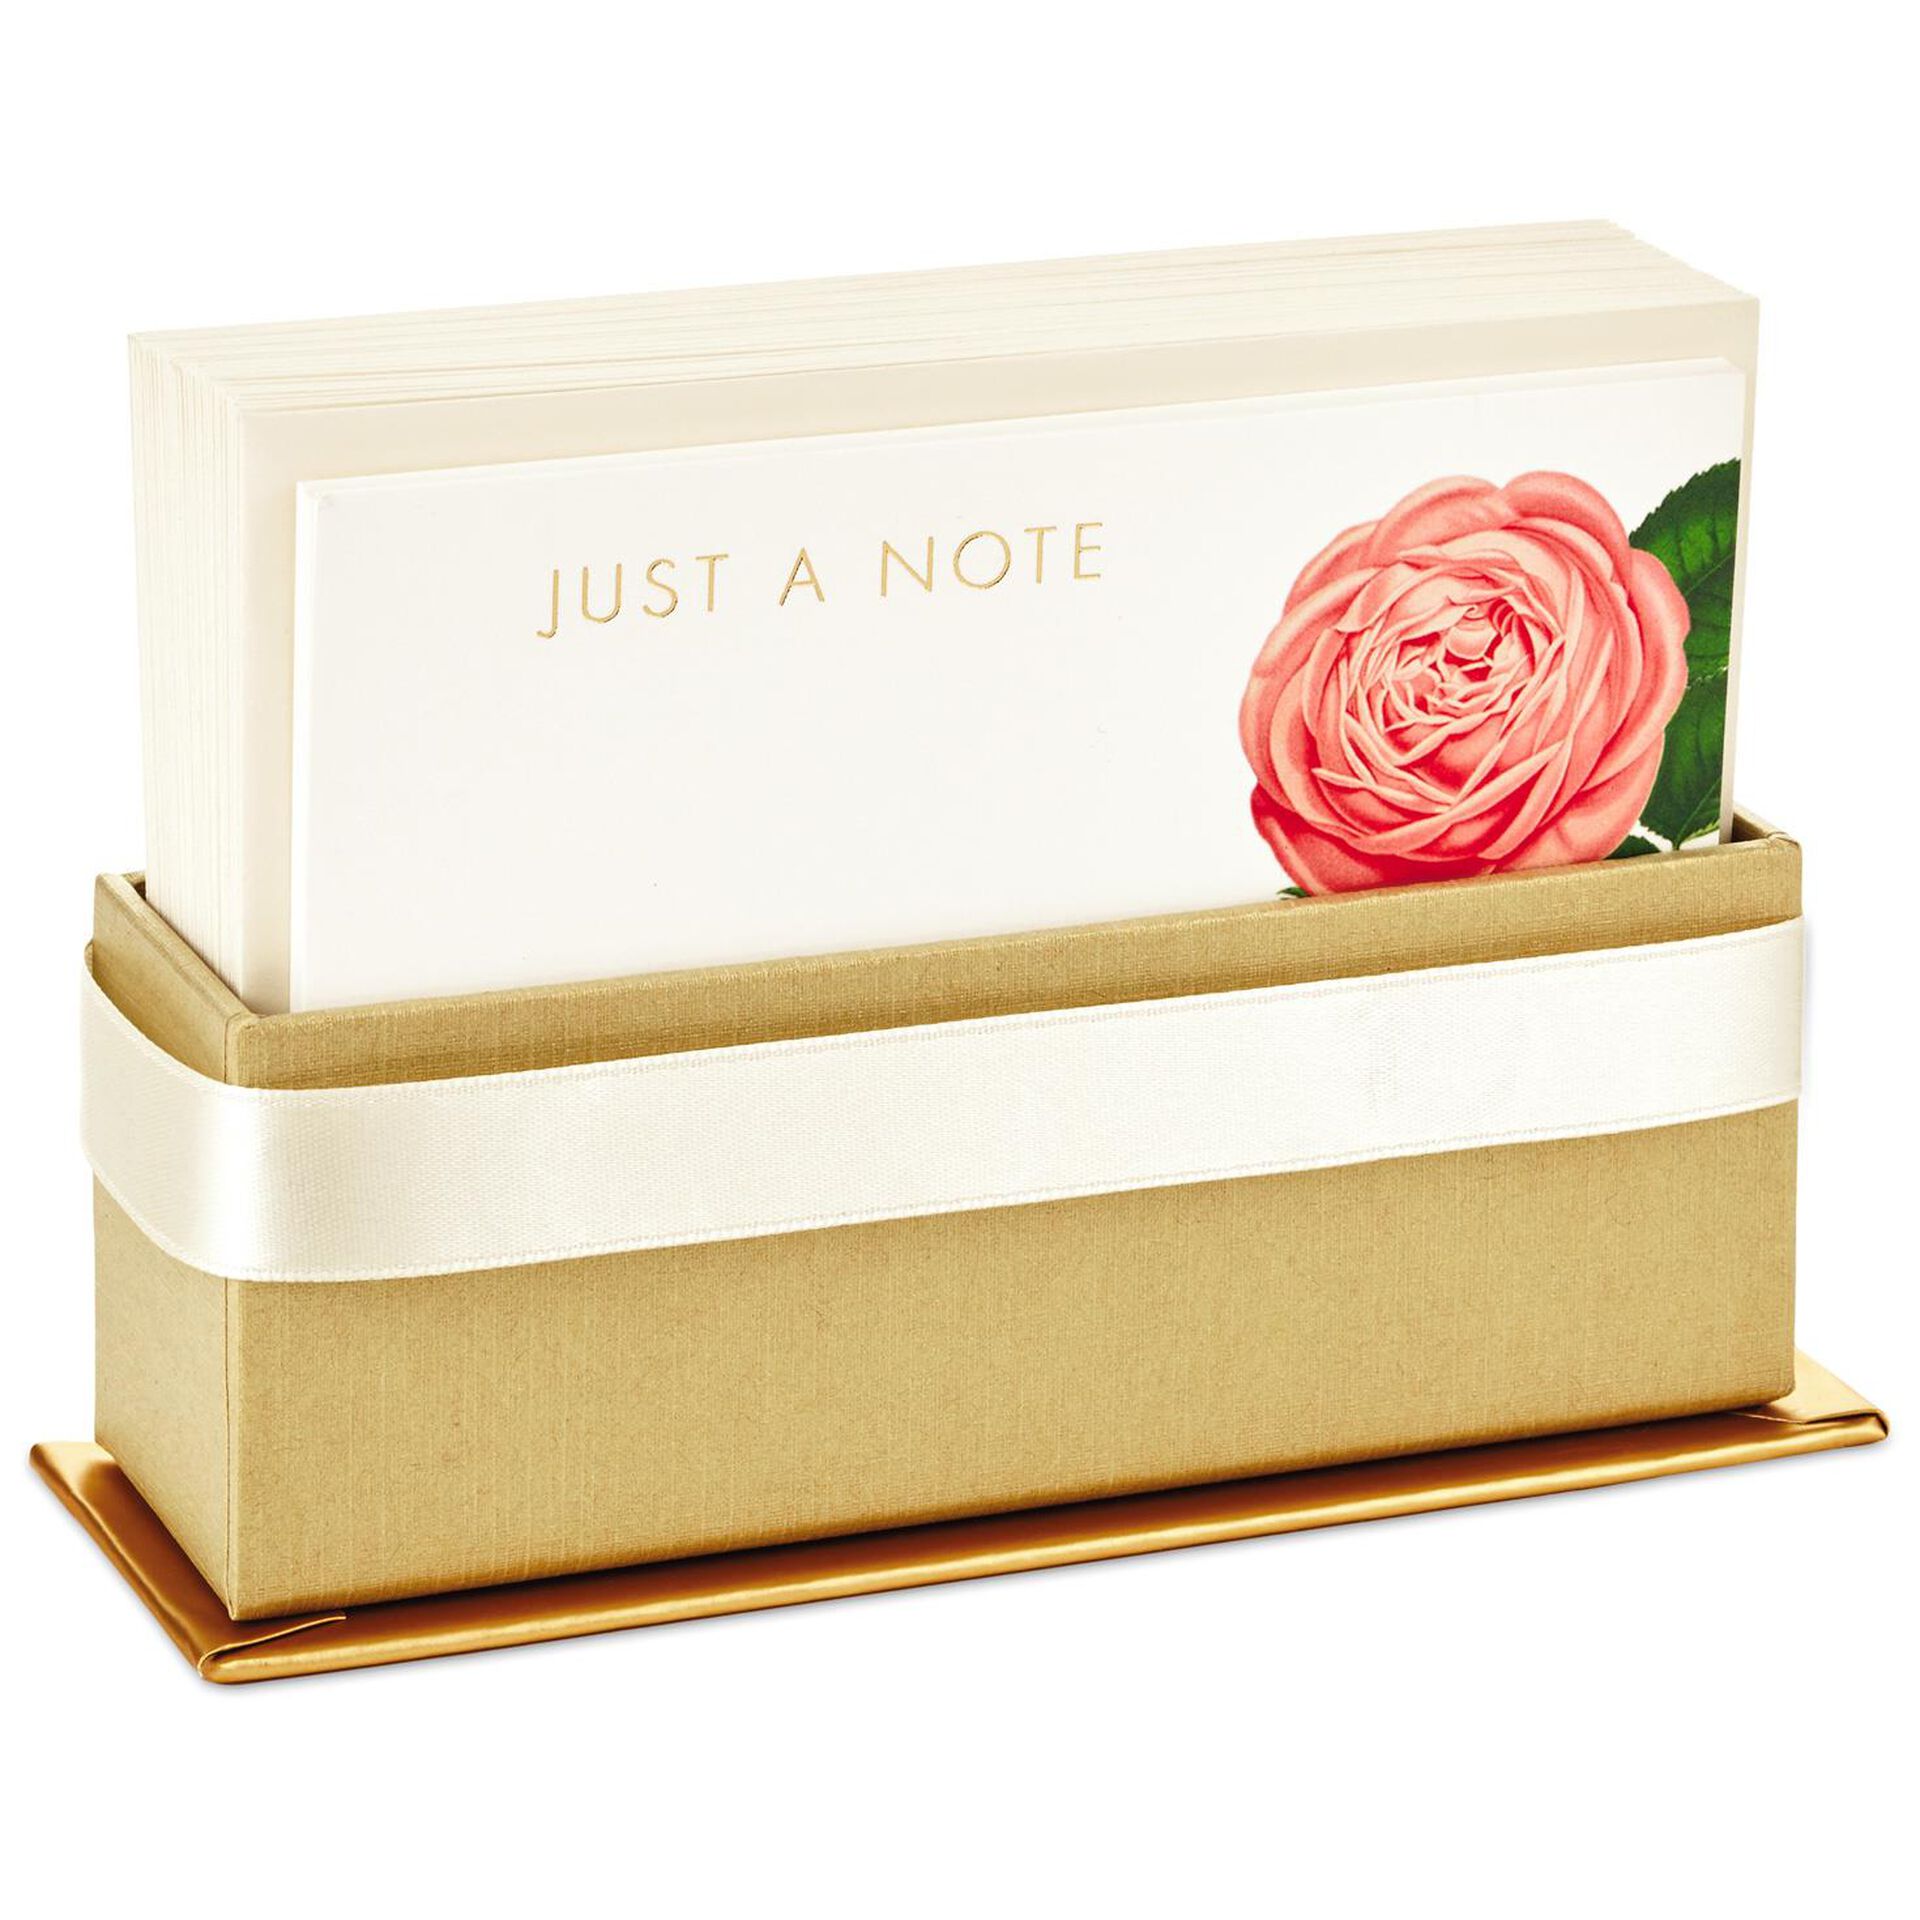 Cream-and-Pink-Roses-Blank-Flat-Note-Cards-With-Caddy-Box-of-40-root-1199SOM1312_SOM1312_02.jpg_Source_Image